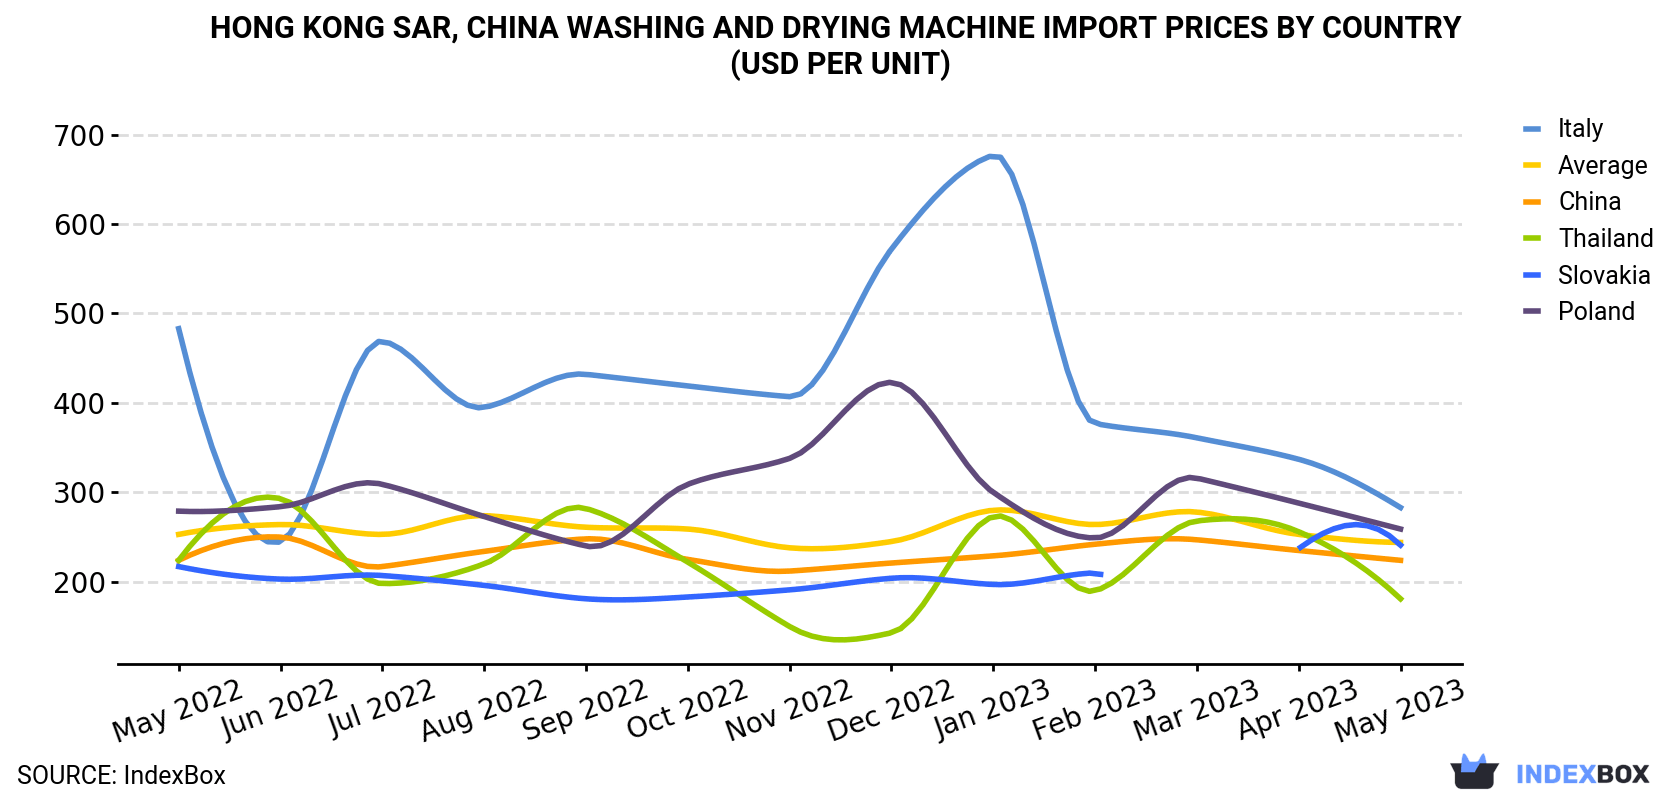 Hong Kong Washing and Drying Machine Import Prices By Country (USD Per Unit)